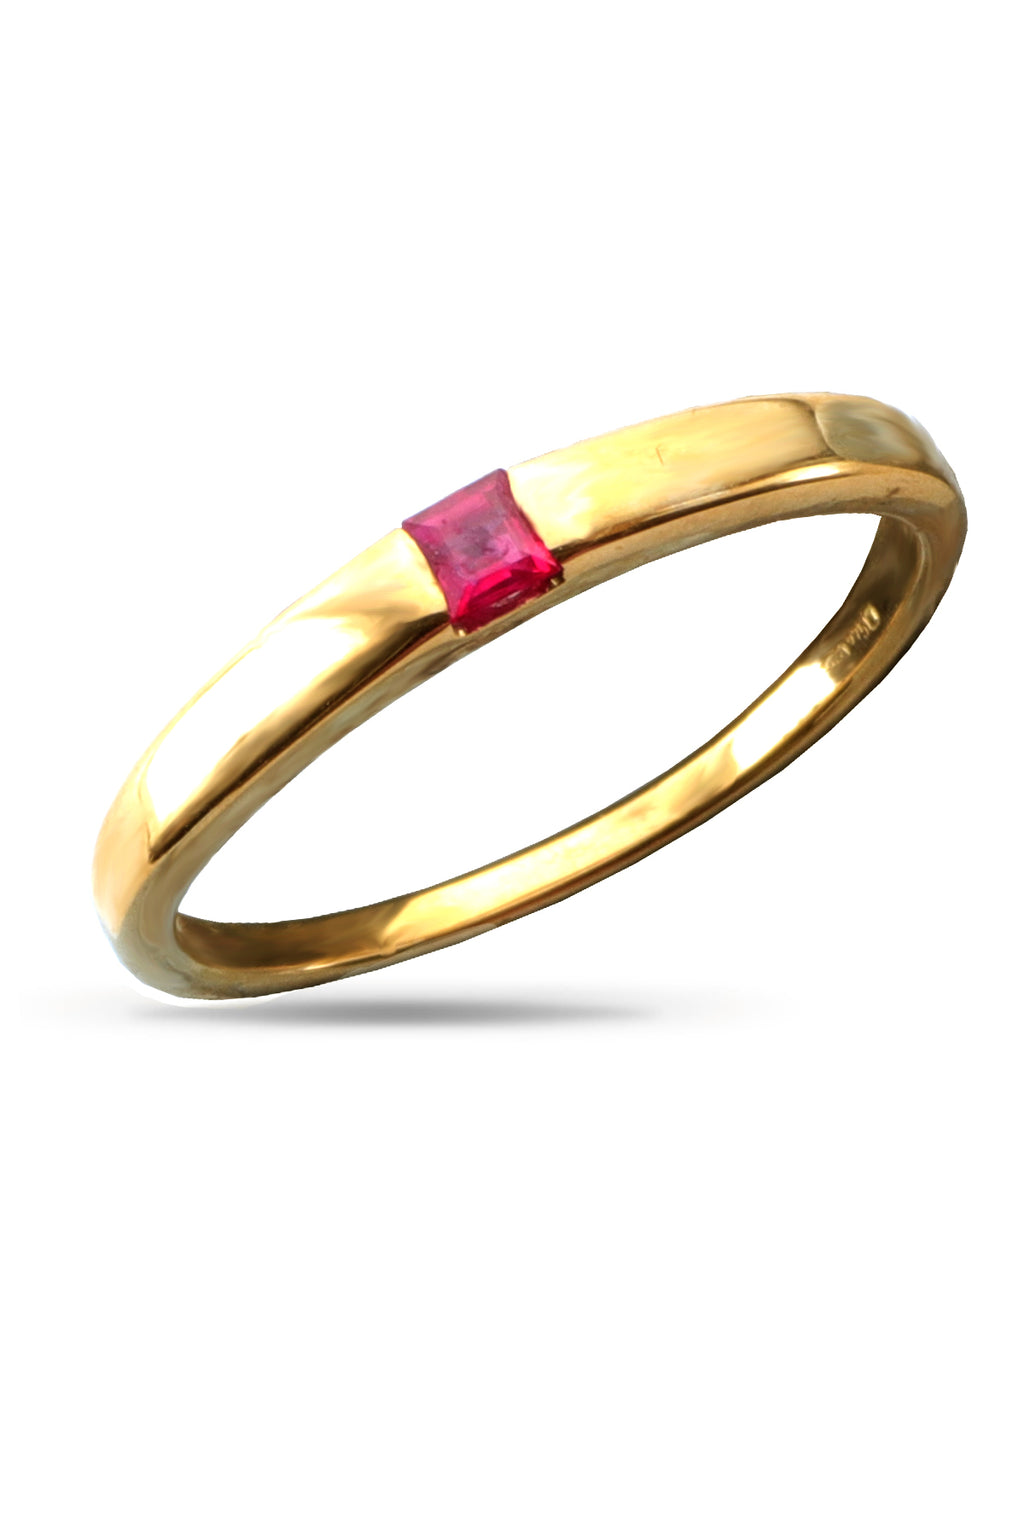 9ct Gold 2.5mm Square Ruby Ring